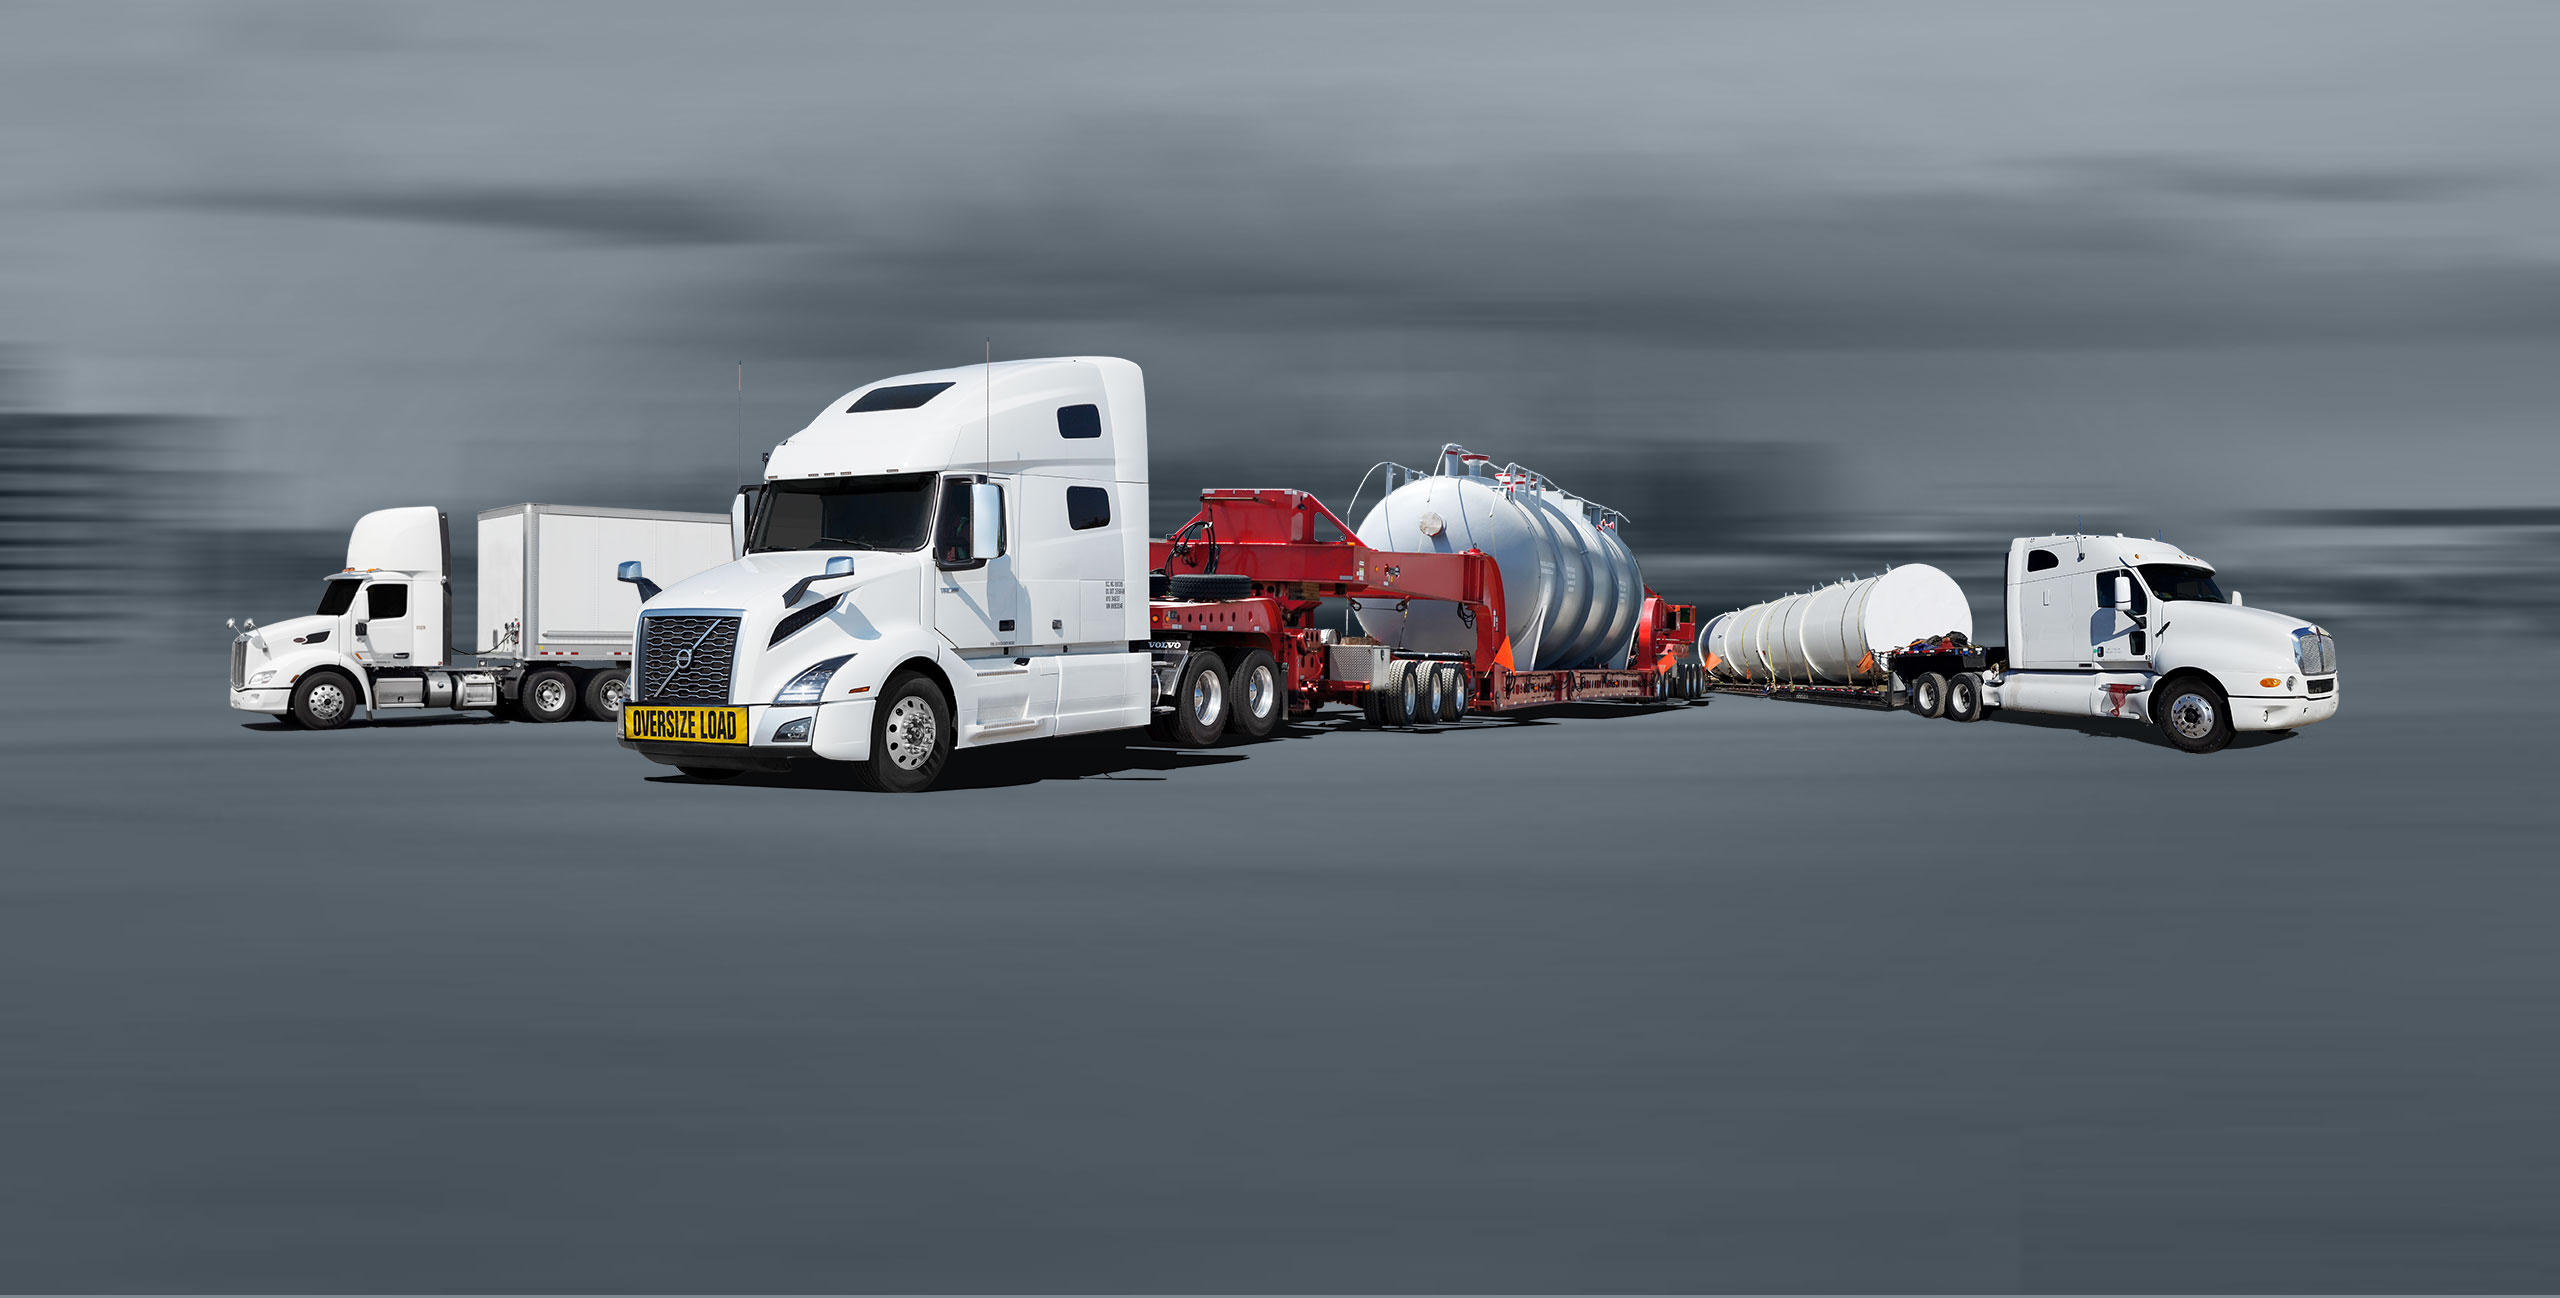 Transport trucks with dry van and flatbed trailers